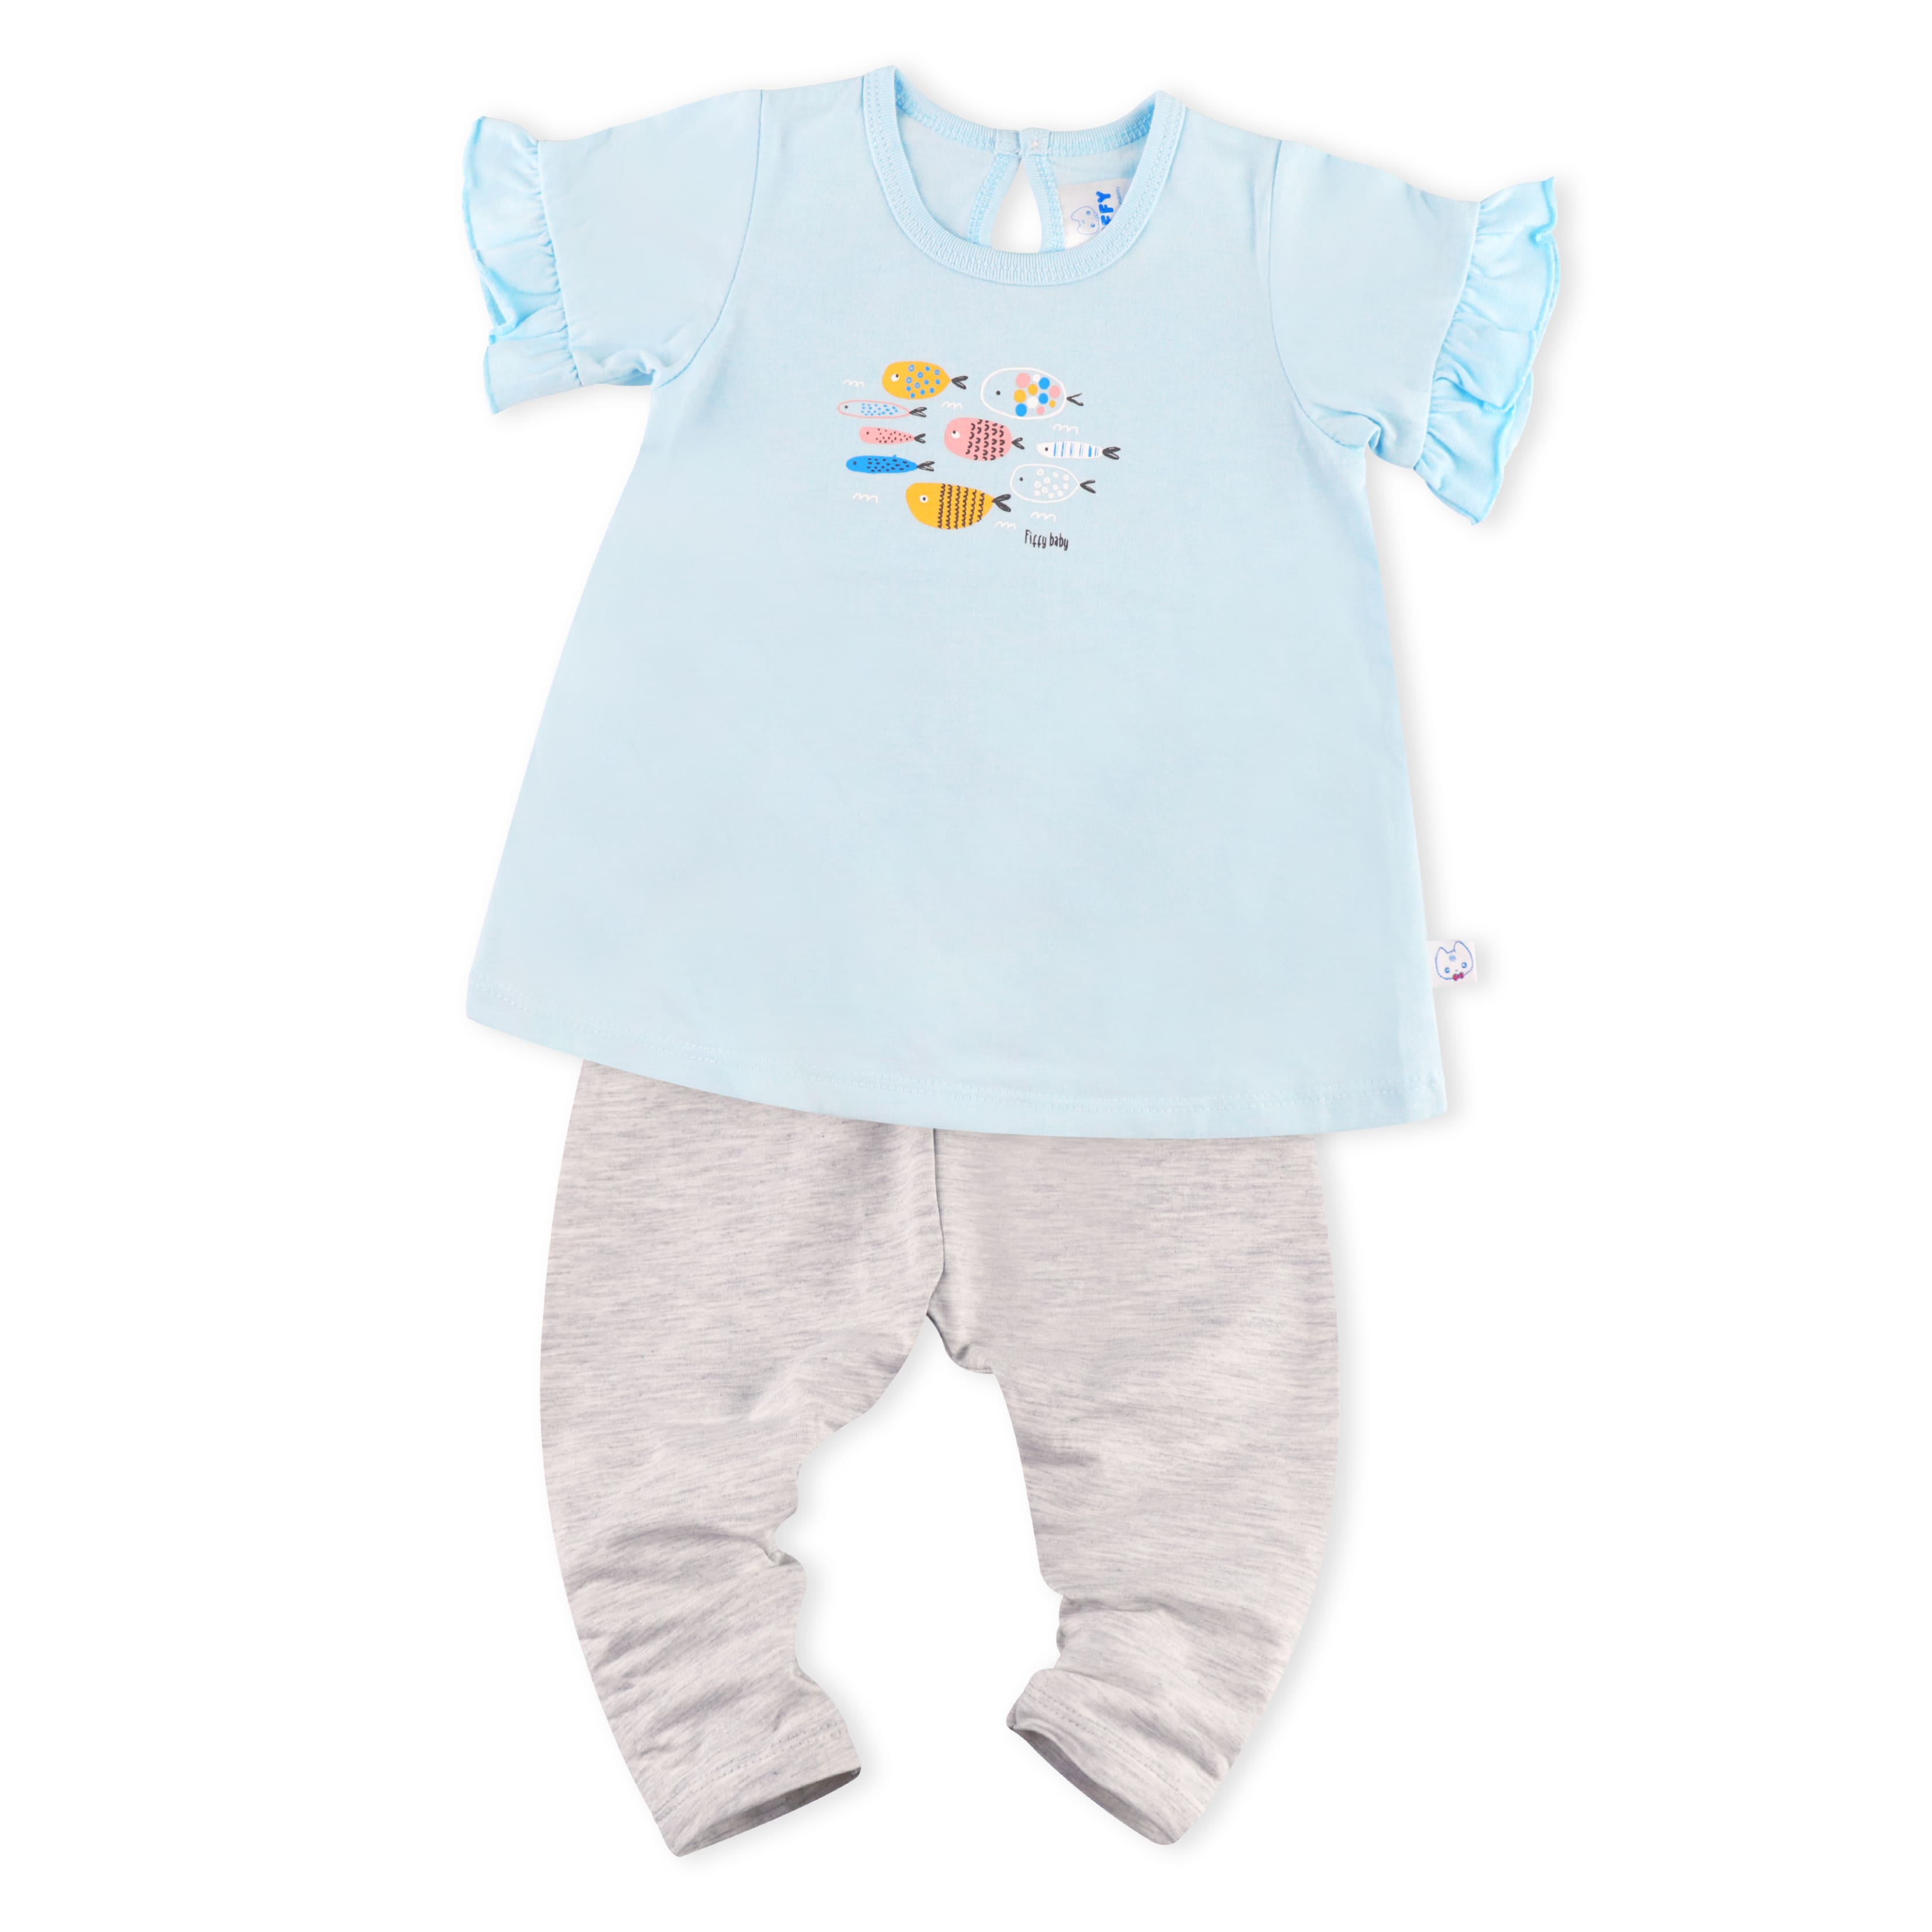 FIFFY COLOURFUL FISHES LEGGING SUIT